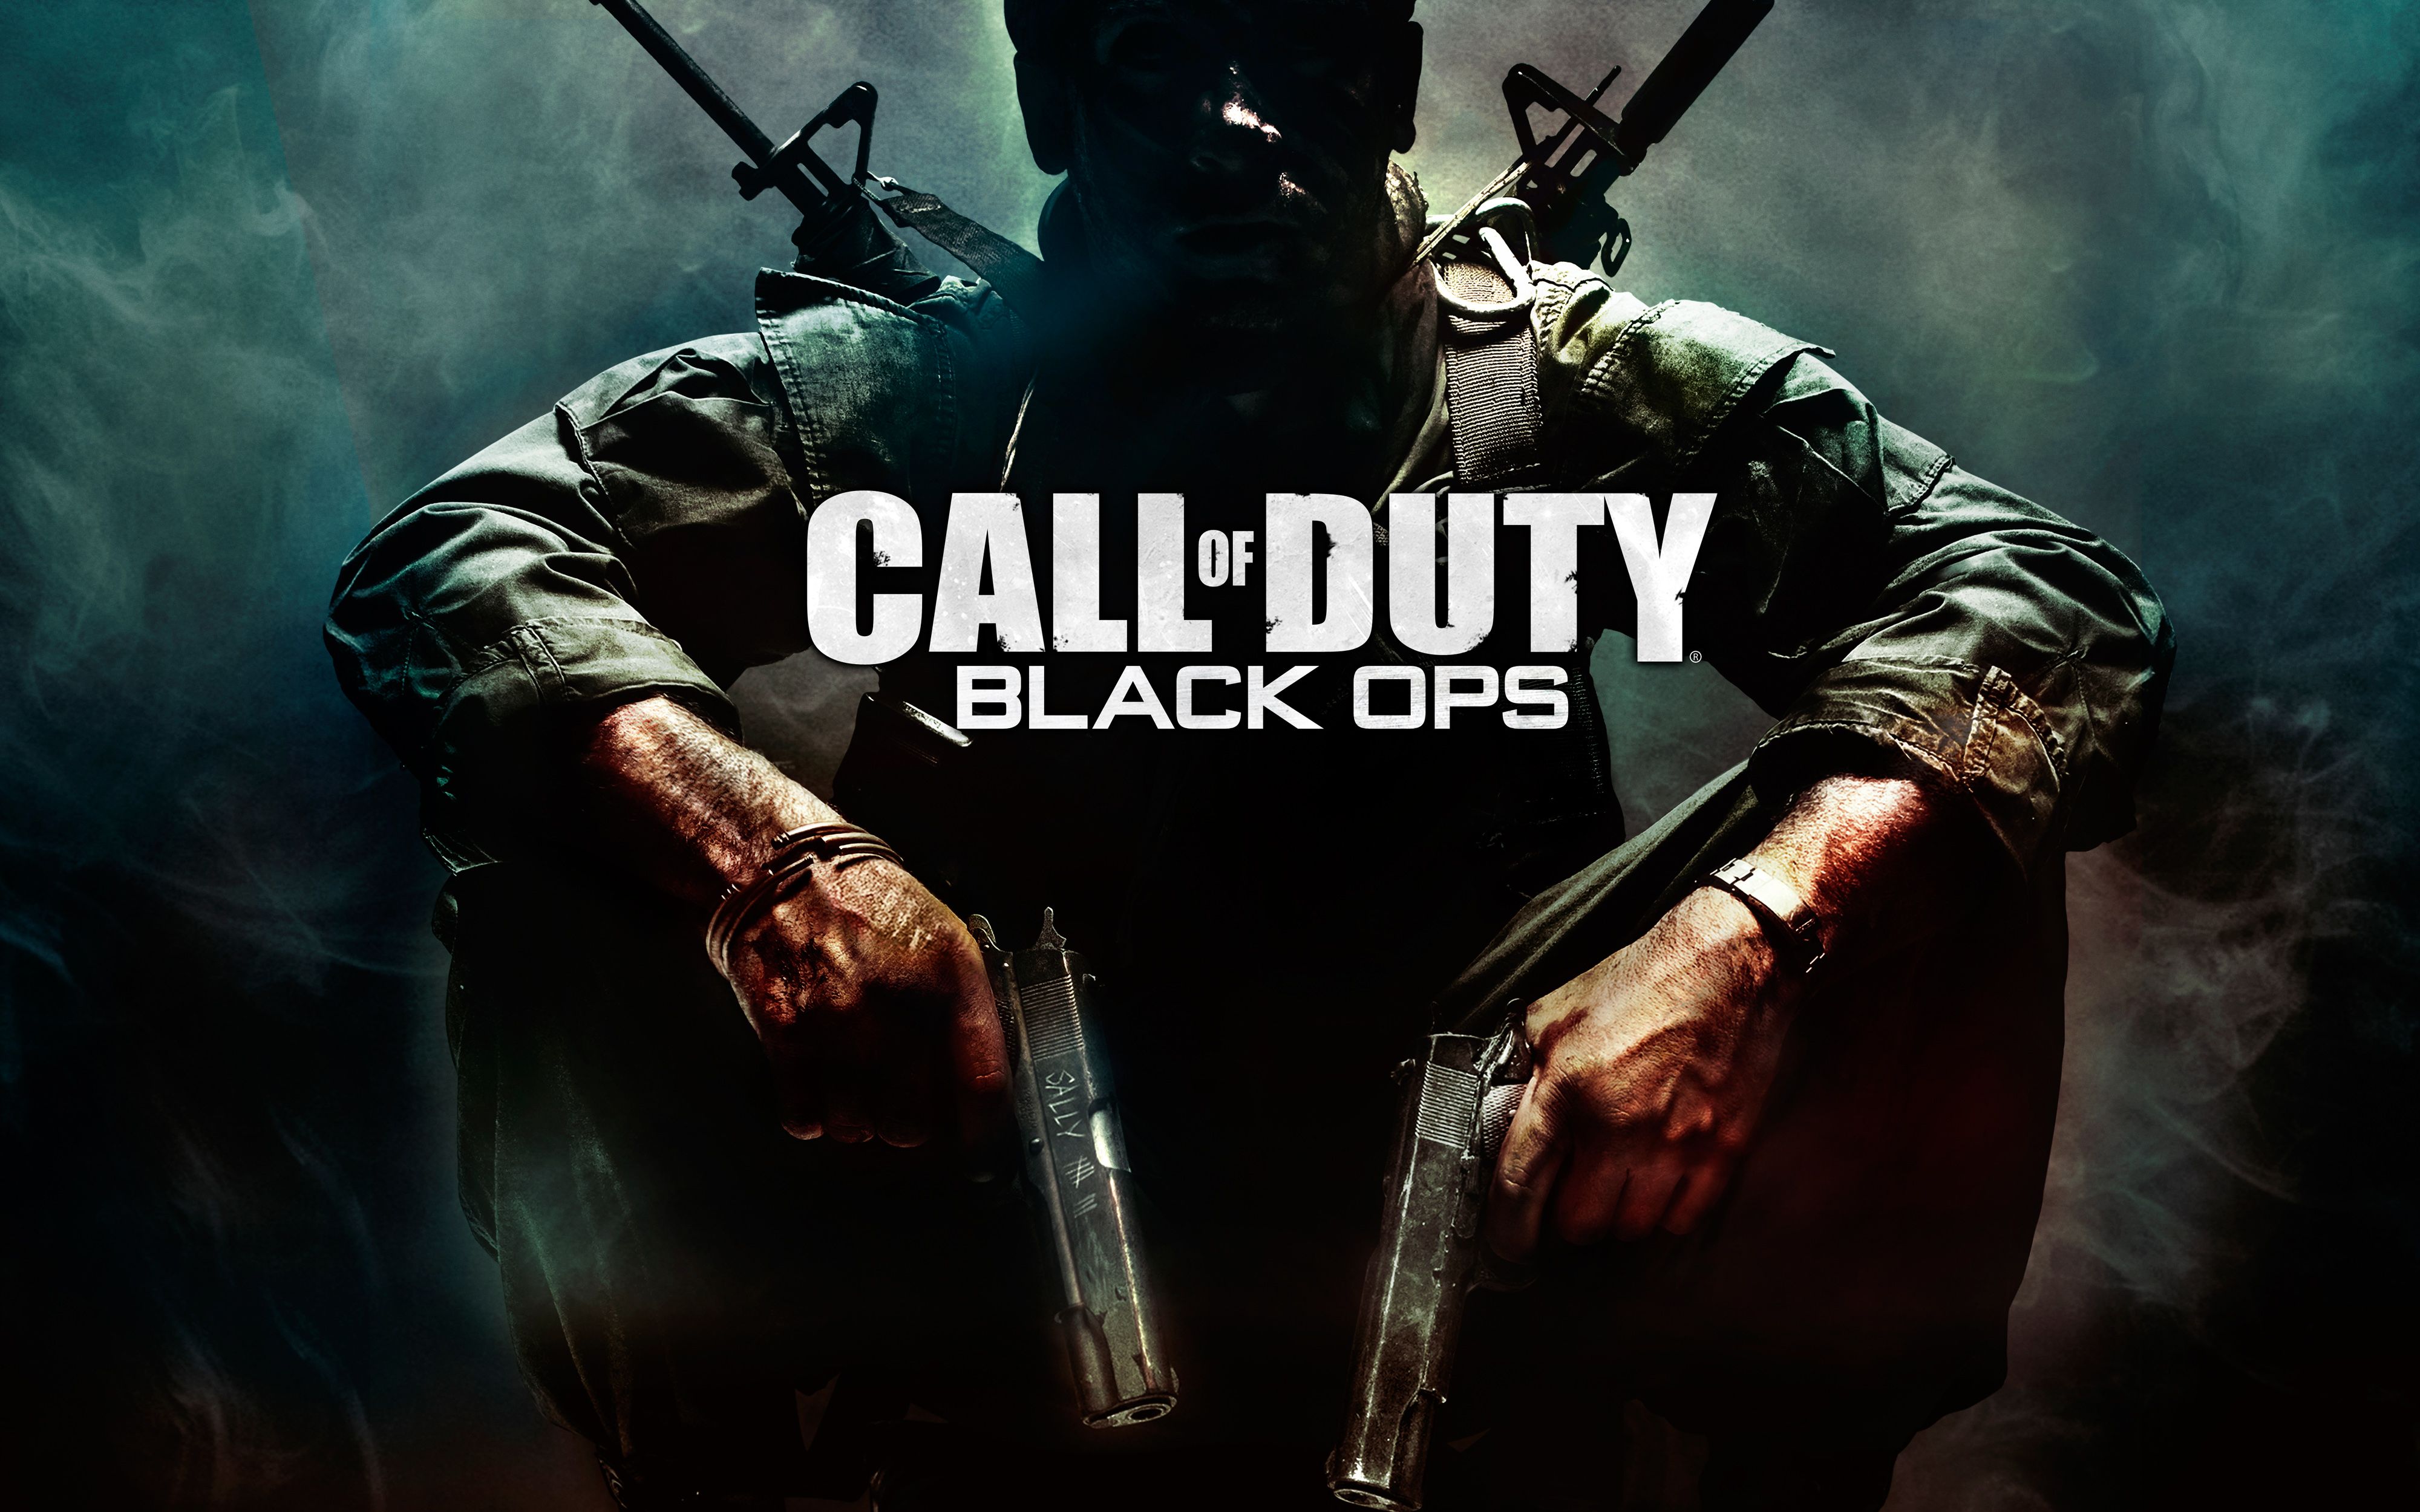 Call Of Duty Wallpapers Black Ops 2